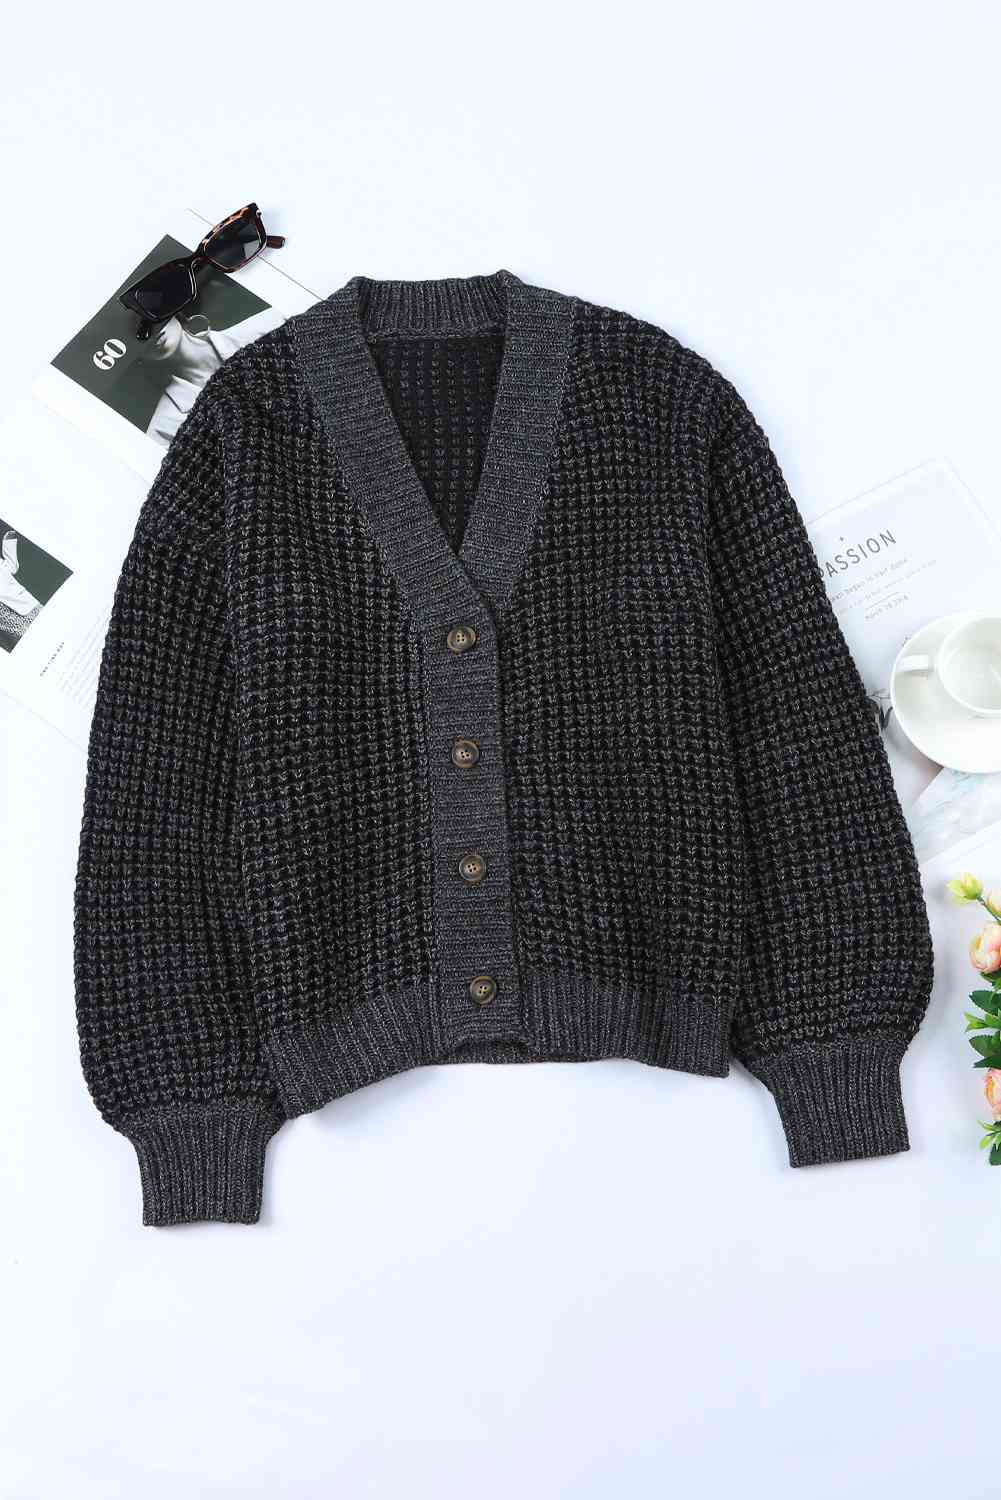 Woven Right Waffle-Knit Drop Shoulder Button-Down Cardigan Black